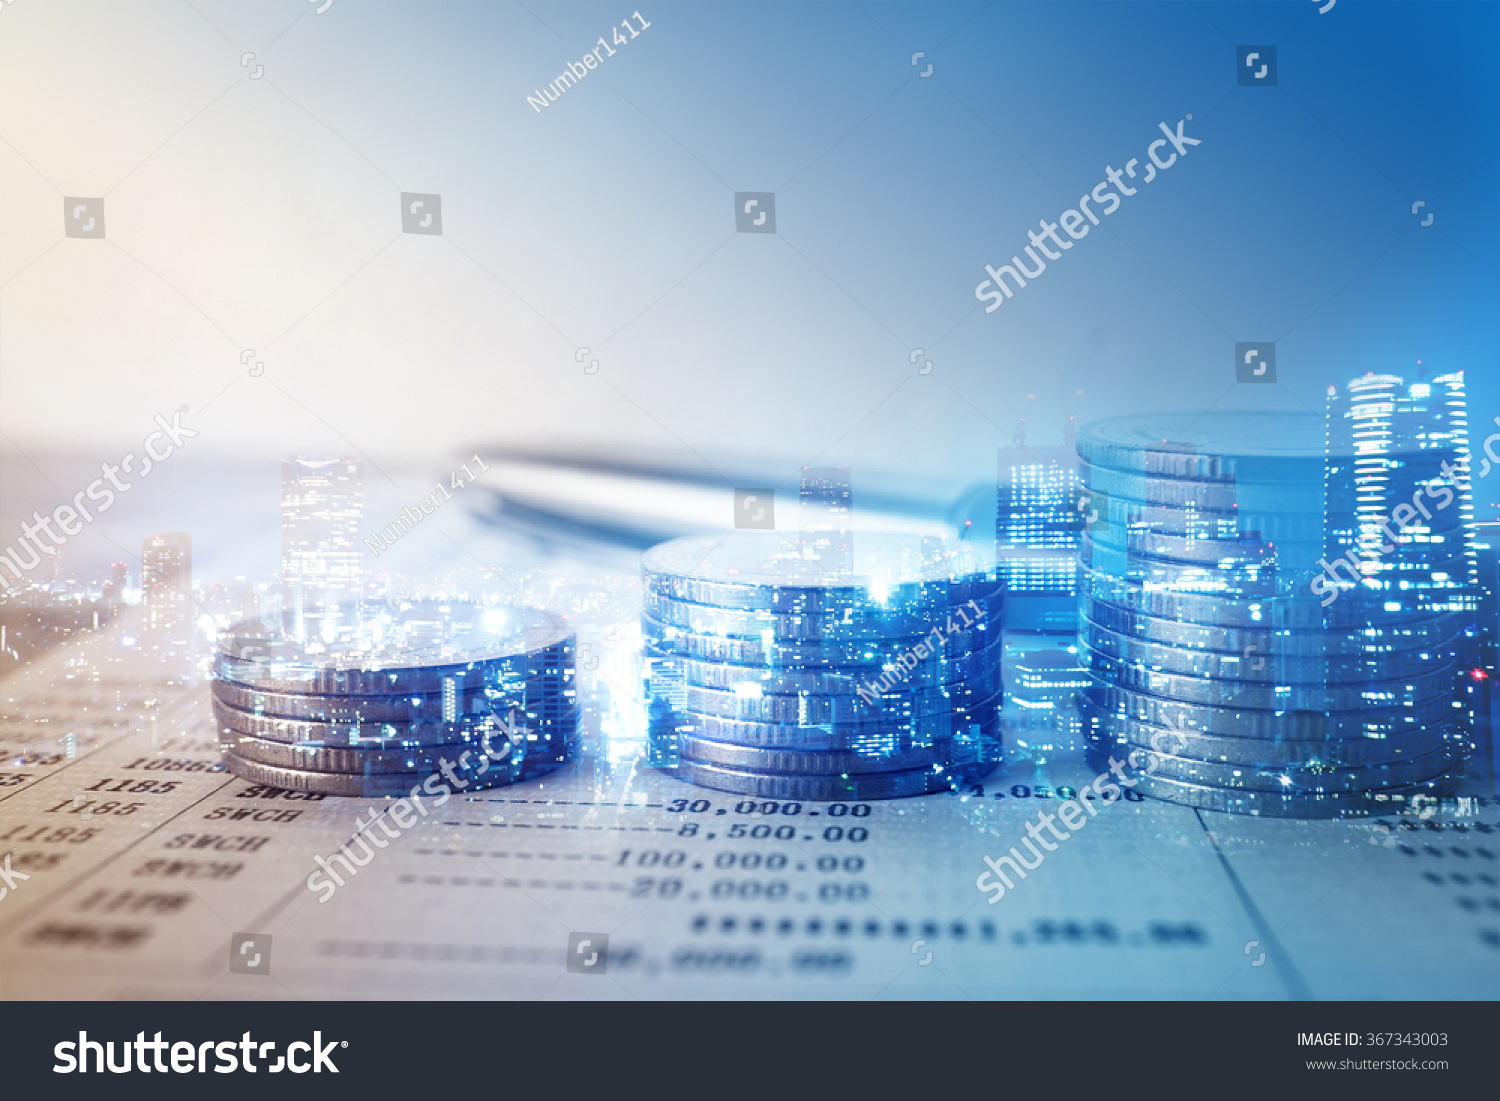 Double exposure of city and rows of coins for finance and banking concept #367343003